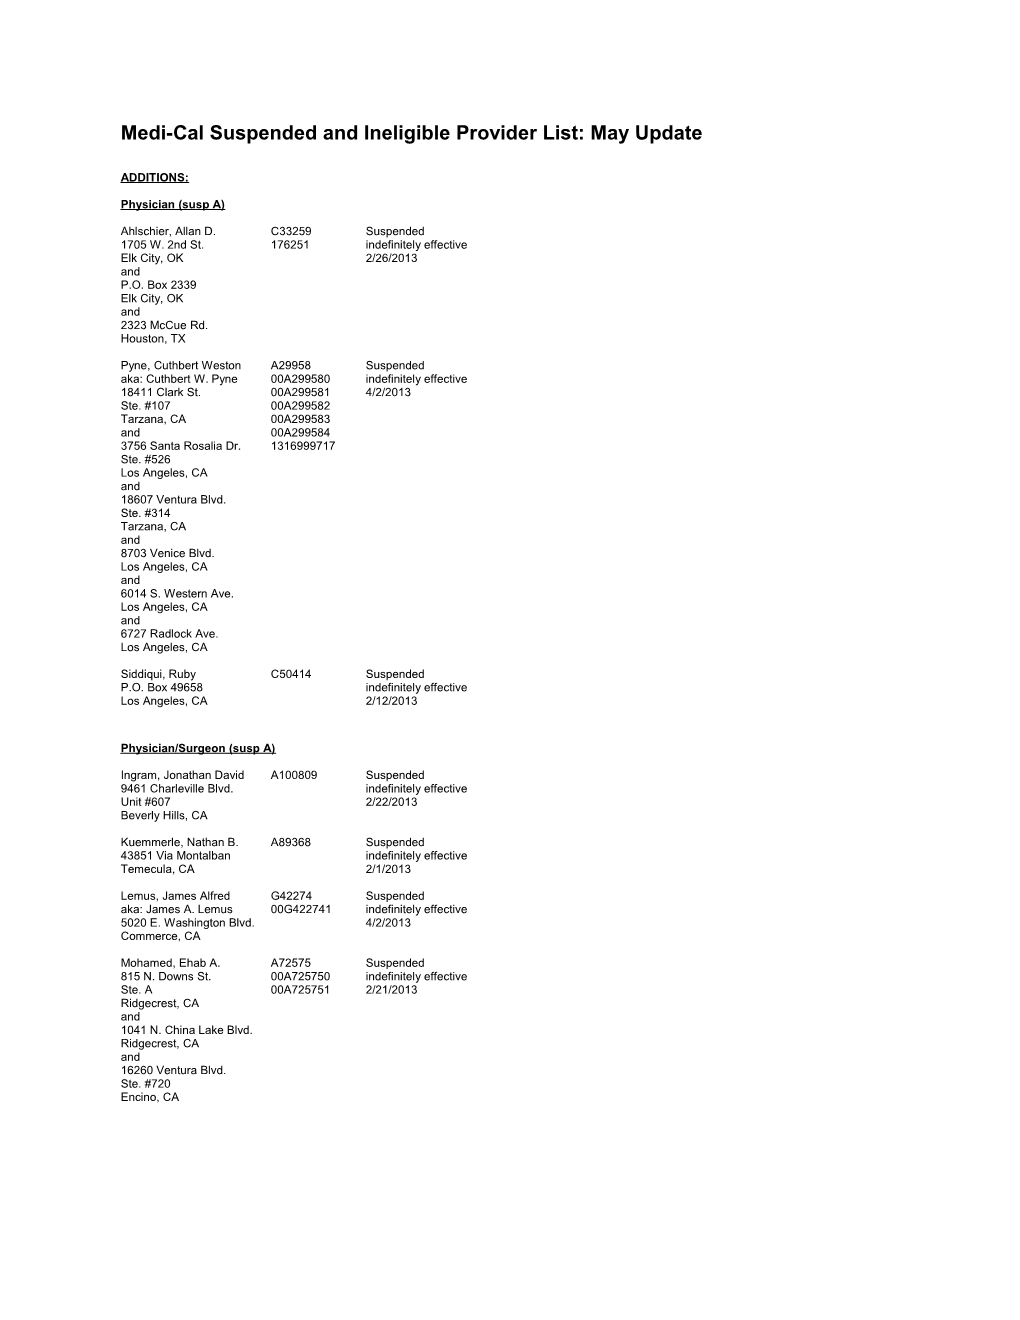 Medi-Cal Suspended and Ineligible Provider List: April 2013 Update s1